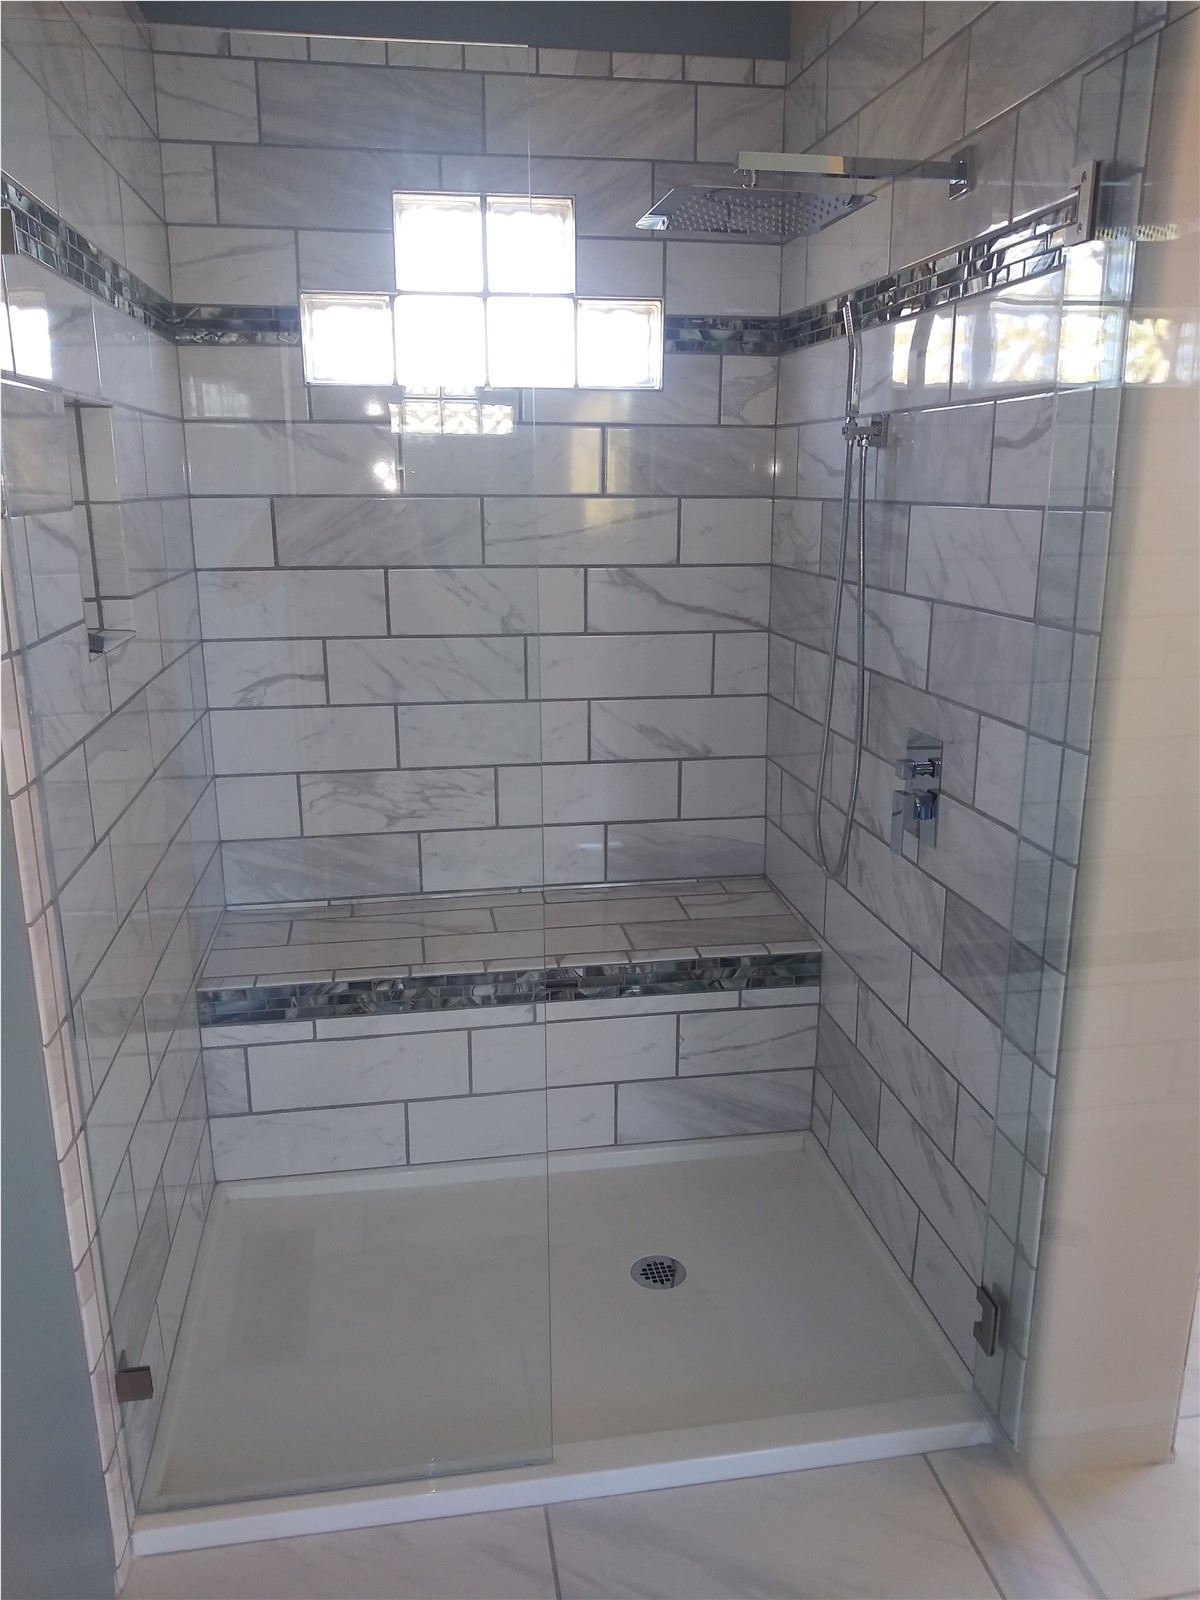 Converting Your Old Tub Into a New Walk-In Shower